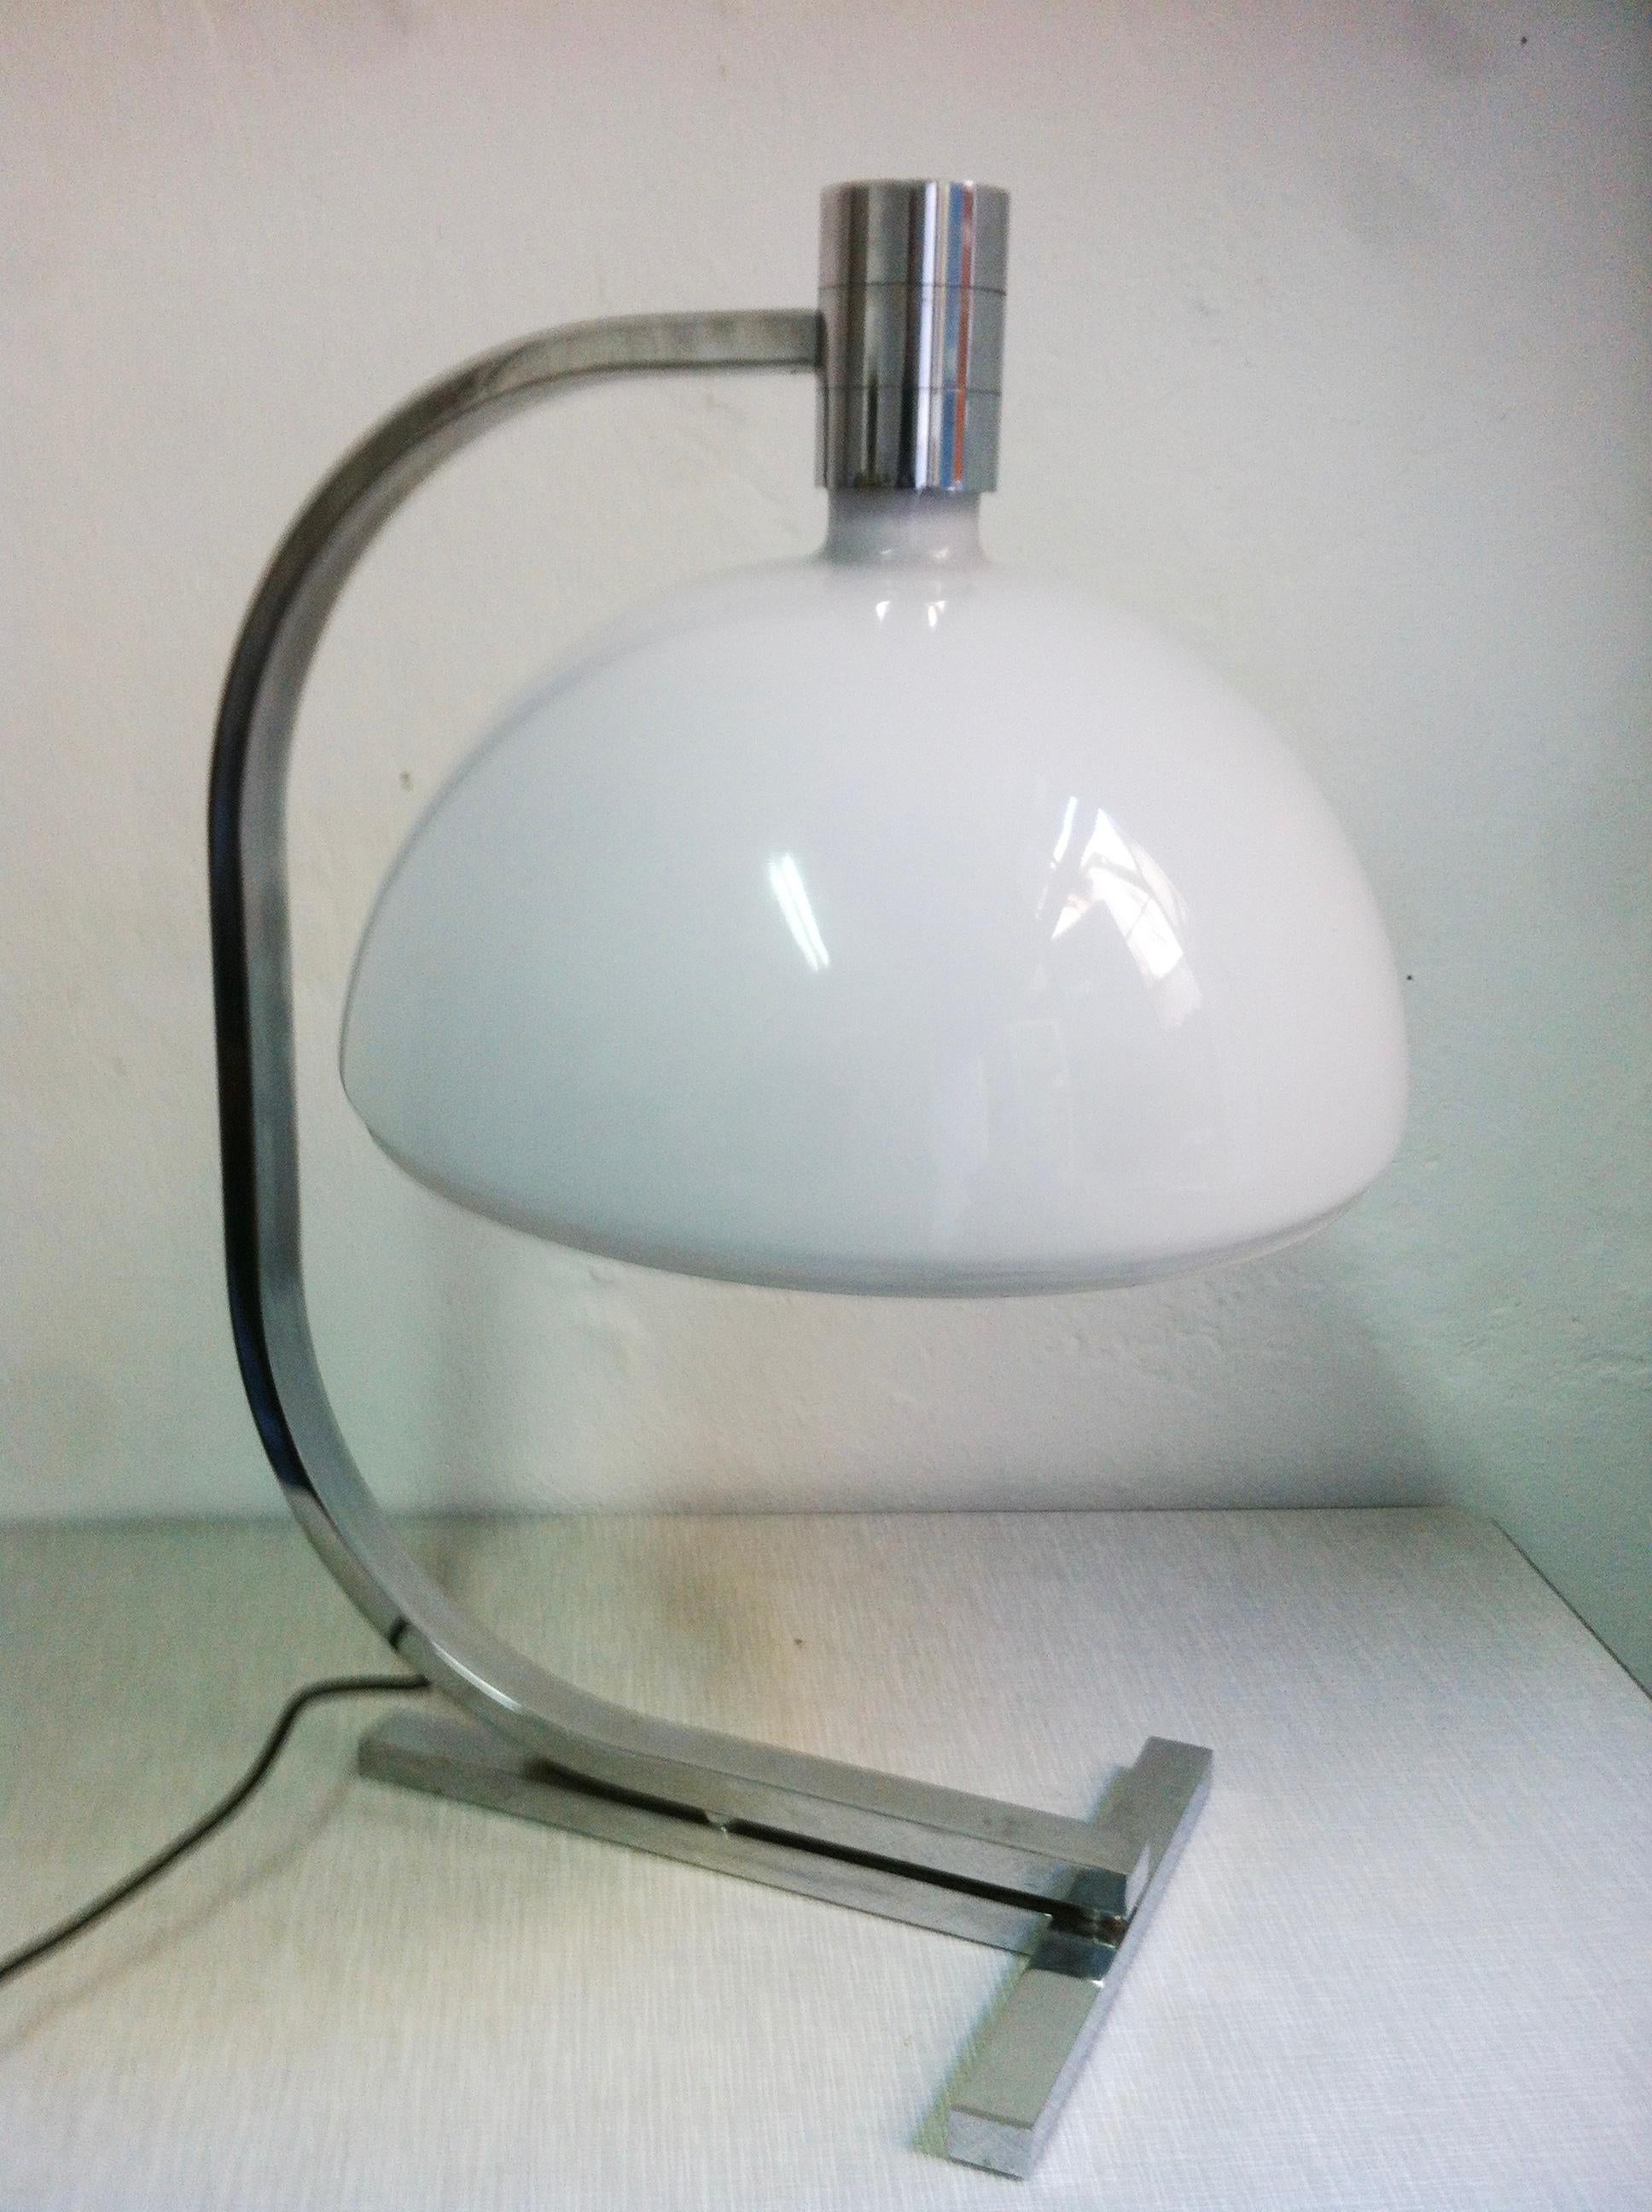 Midcentury AM/AS Table Lamp by Helg, Piva, and Albini for Sirrah Large, 1969 (Italienisch) im Angebot